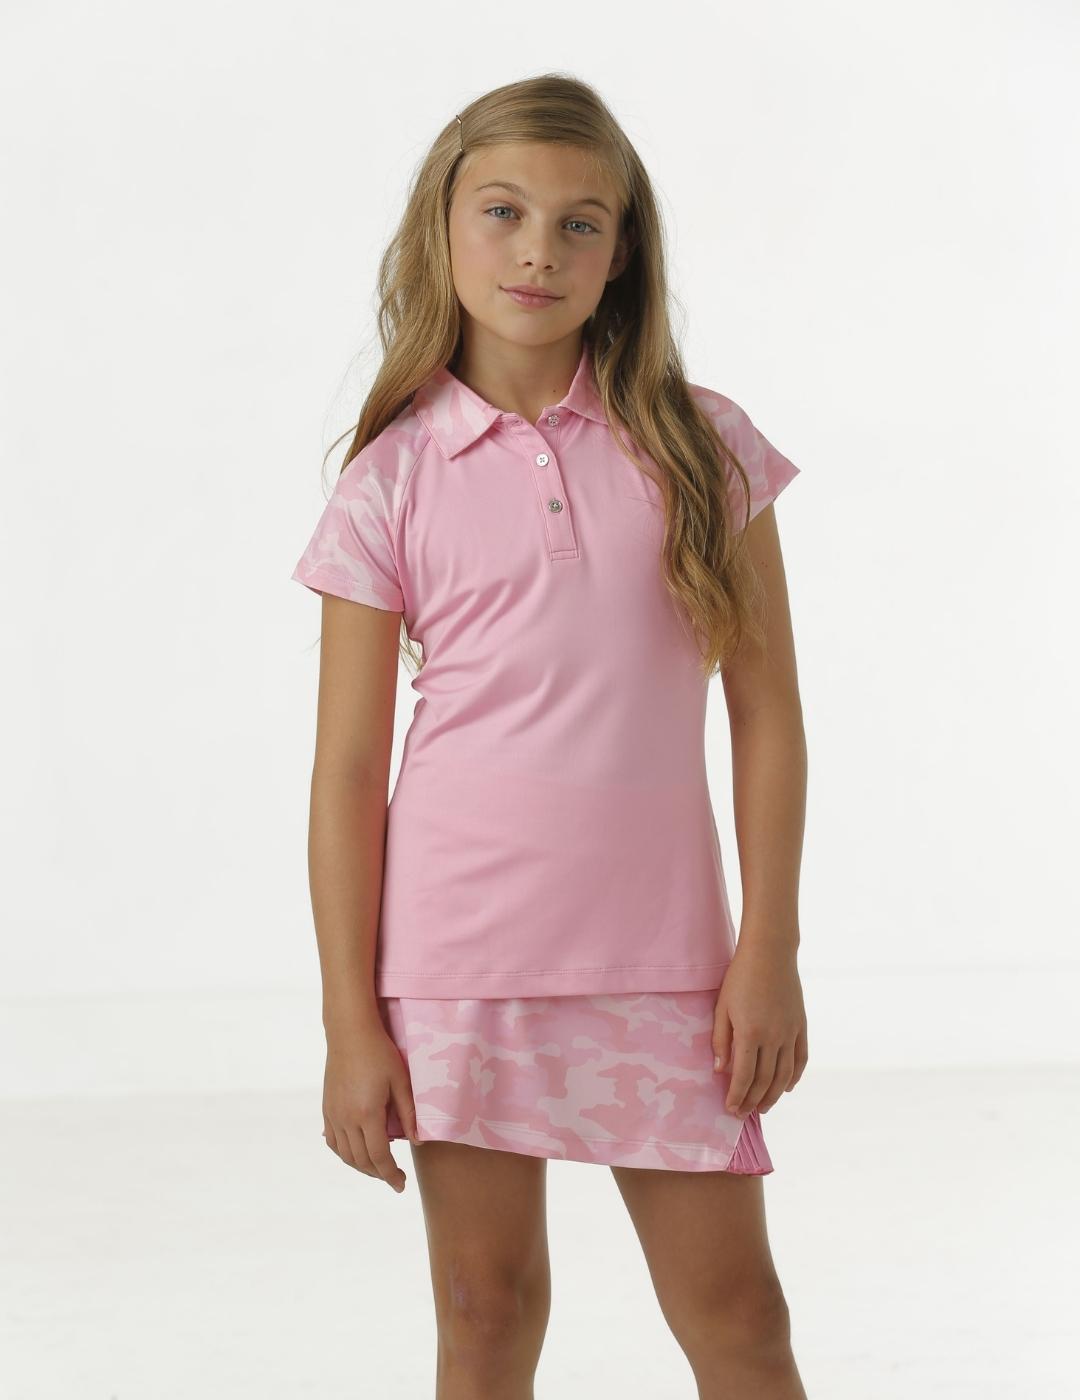 Rylee Youth Girls' Polo